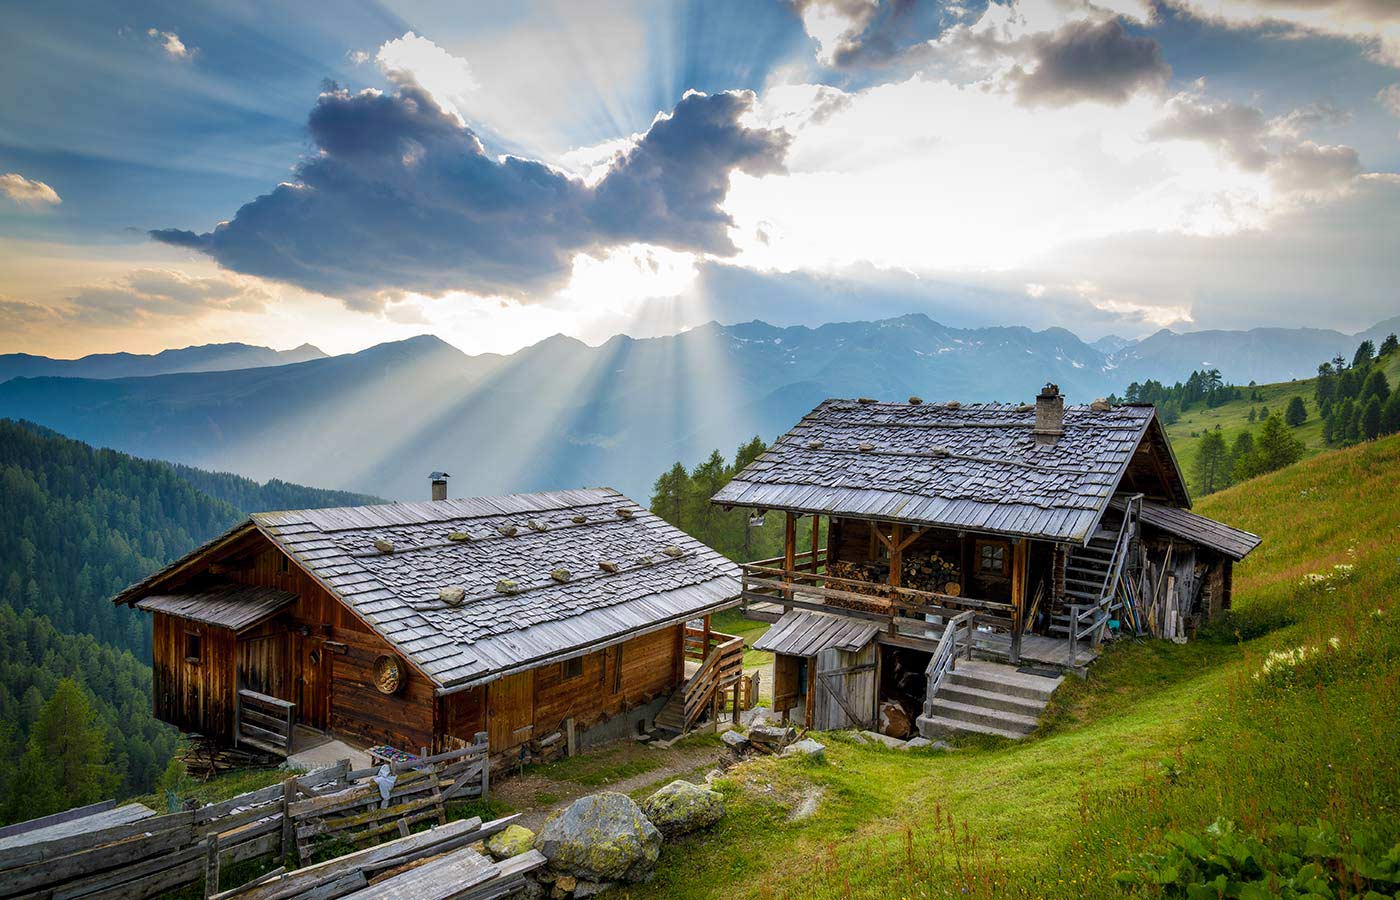 Two old wooden alpine huts illuminated by the light of the sun hidden by the clouds